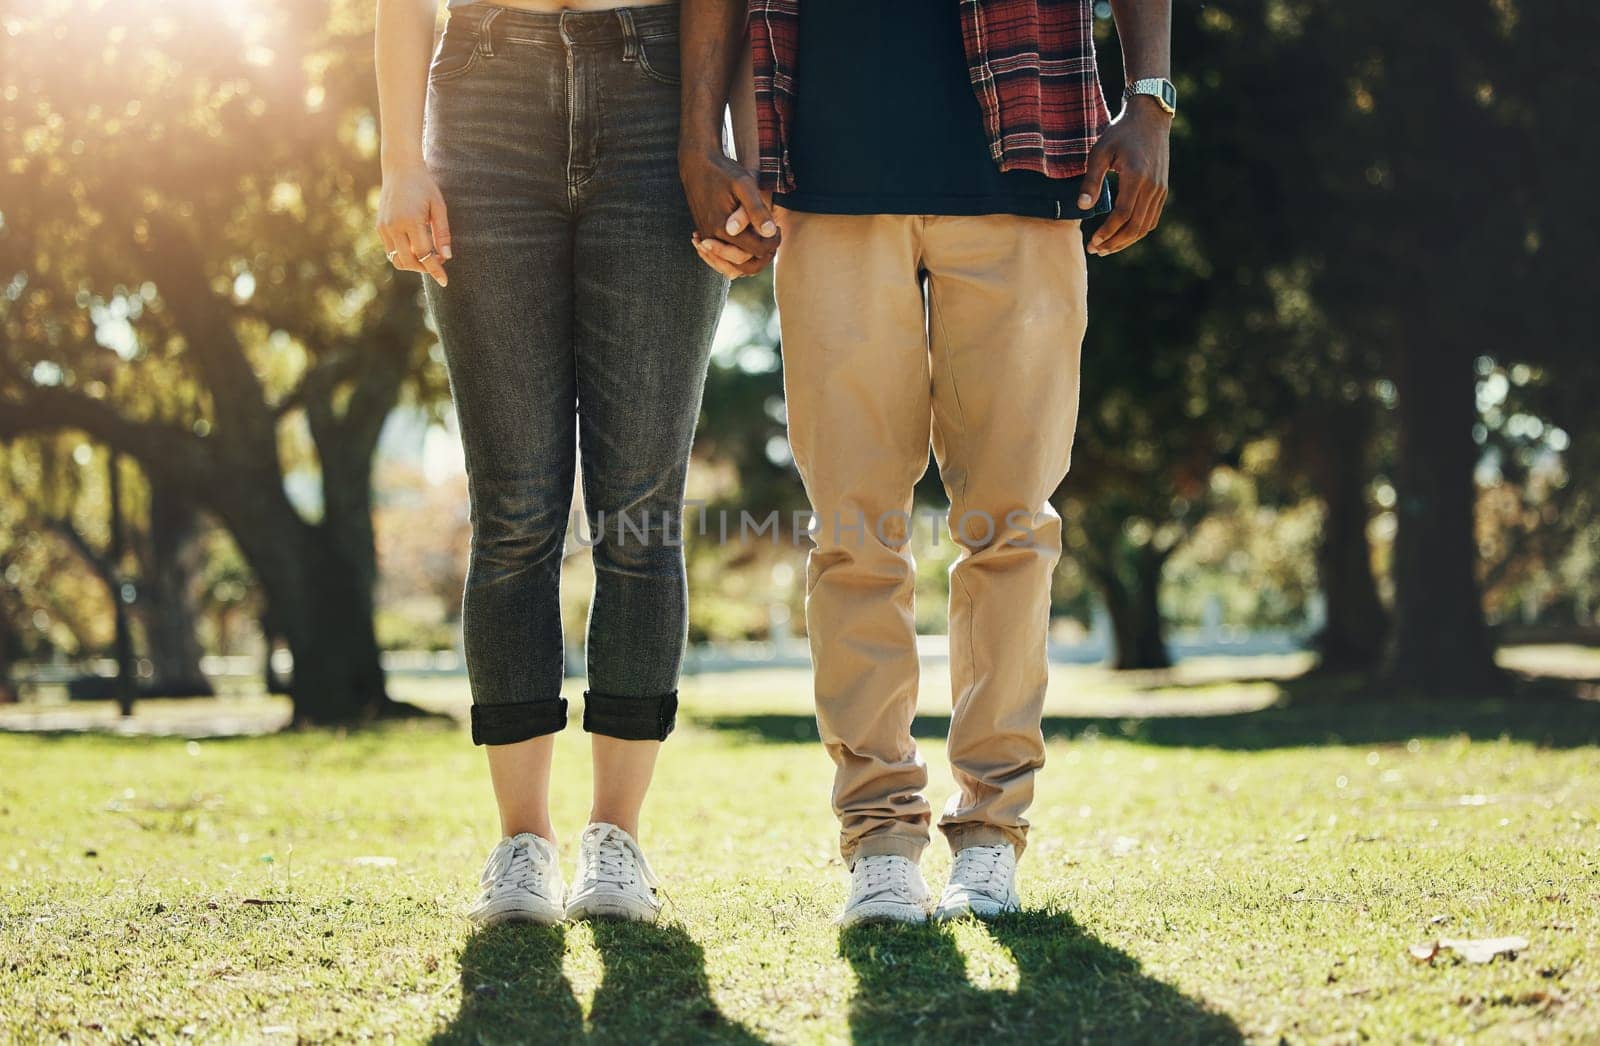 Love, holding hands and shoes of interracial couple in park for calm, freedom or support. Relax, happy and peace with feet of black man and woman standing in grass field for nature, spring or bonding.